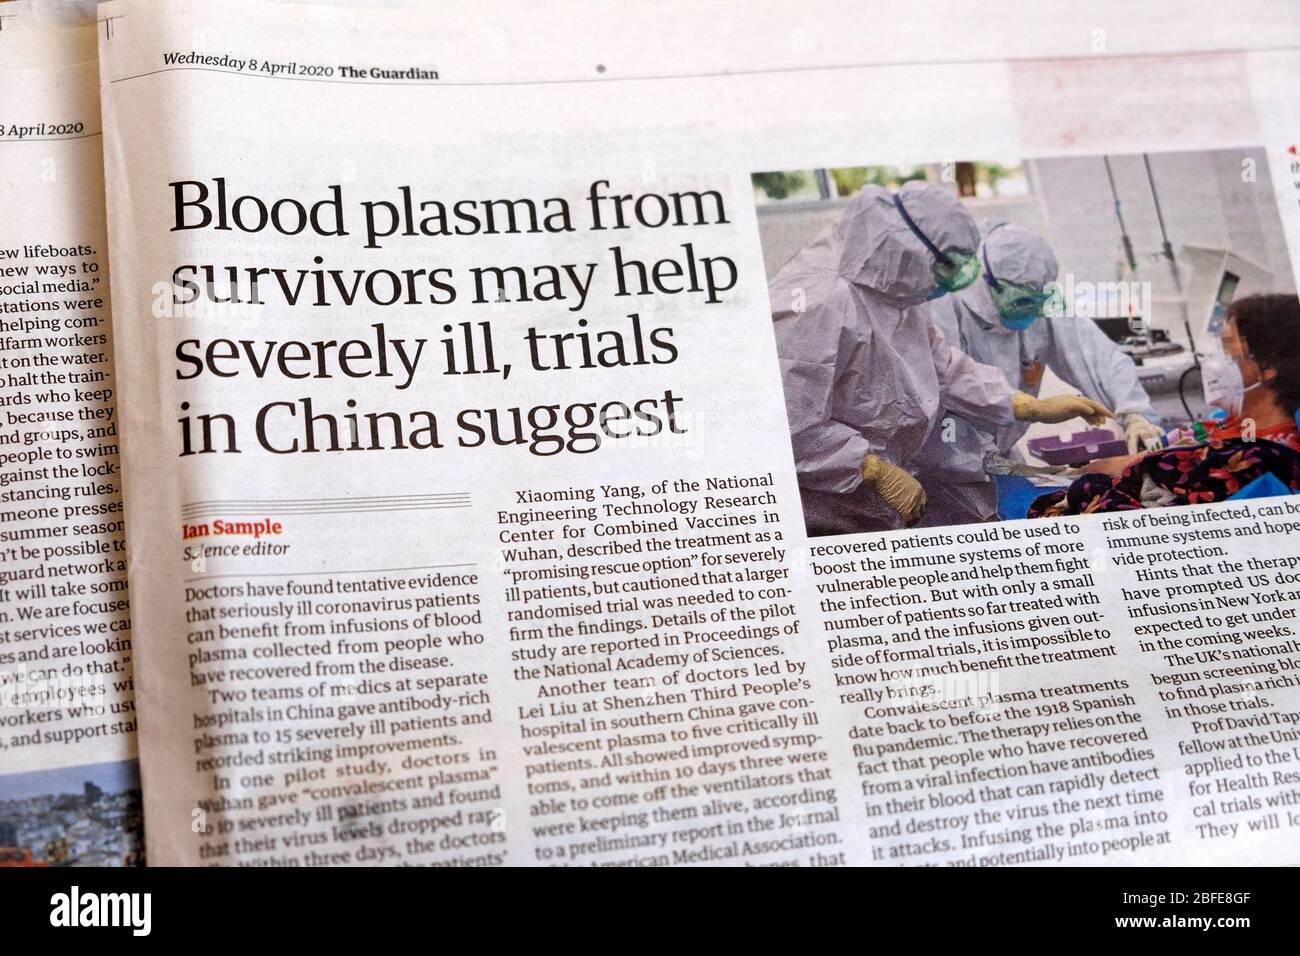 Guardian newspaper inside page article  "Blood plasma from survivors may help severely ill, trials in China suggest" 8 April 2020 London England UK Stock Photo